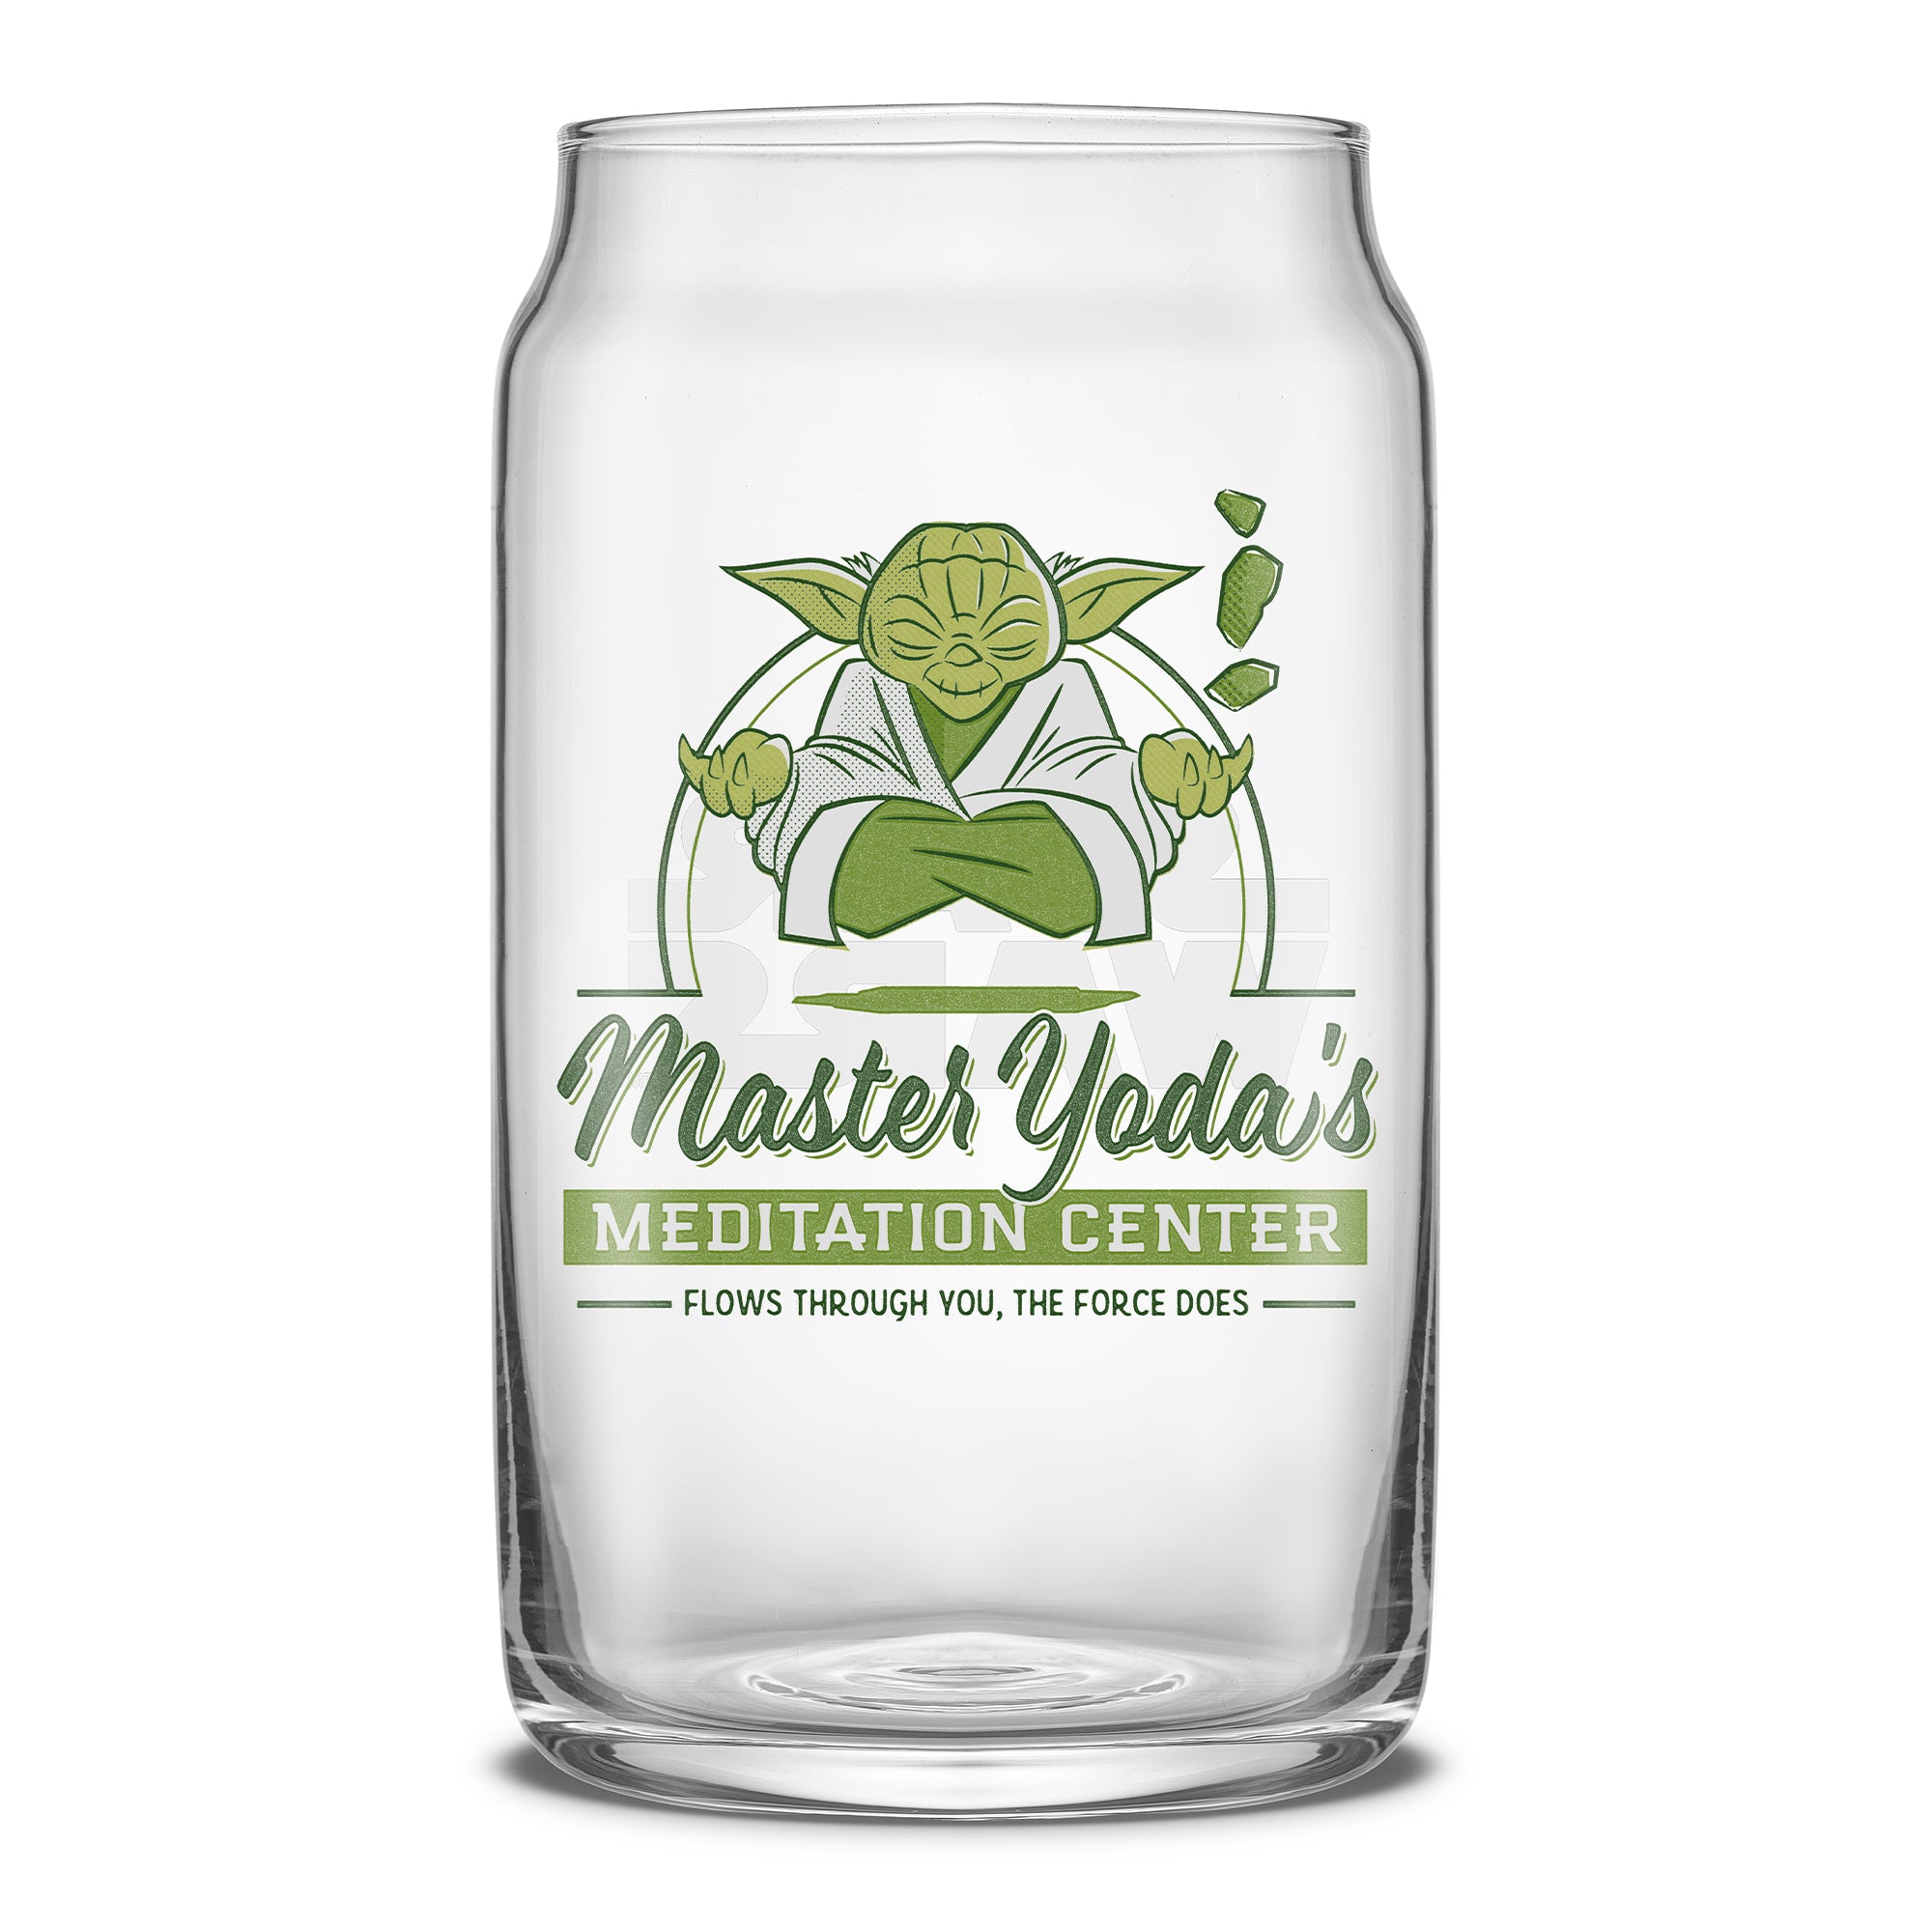 Retro-inspired Star Wars can-shaped drinking glasses featuring Master Yoda's Meditation Center.